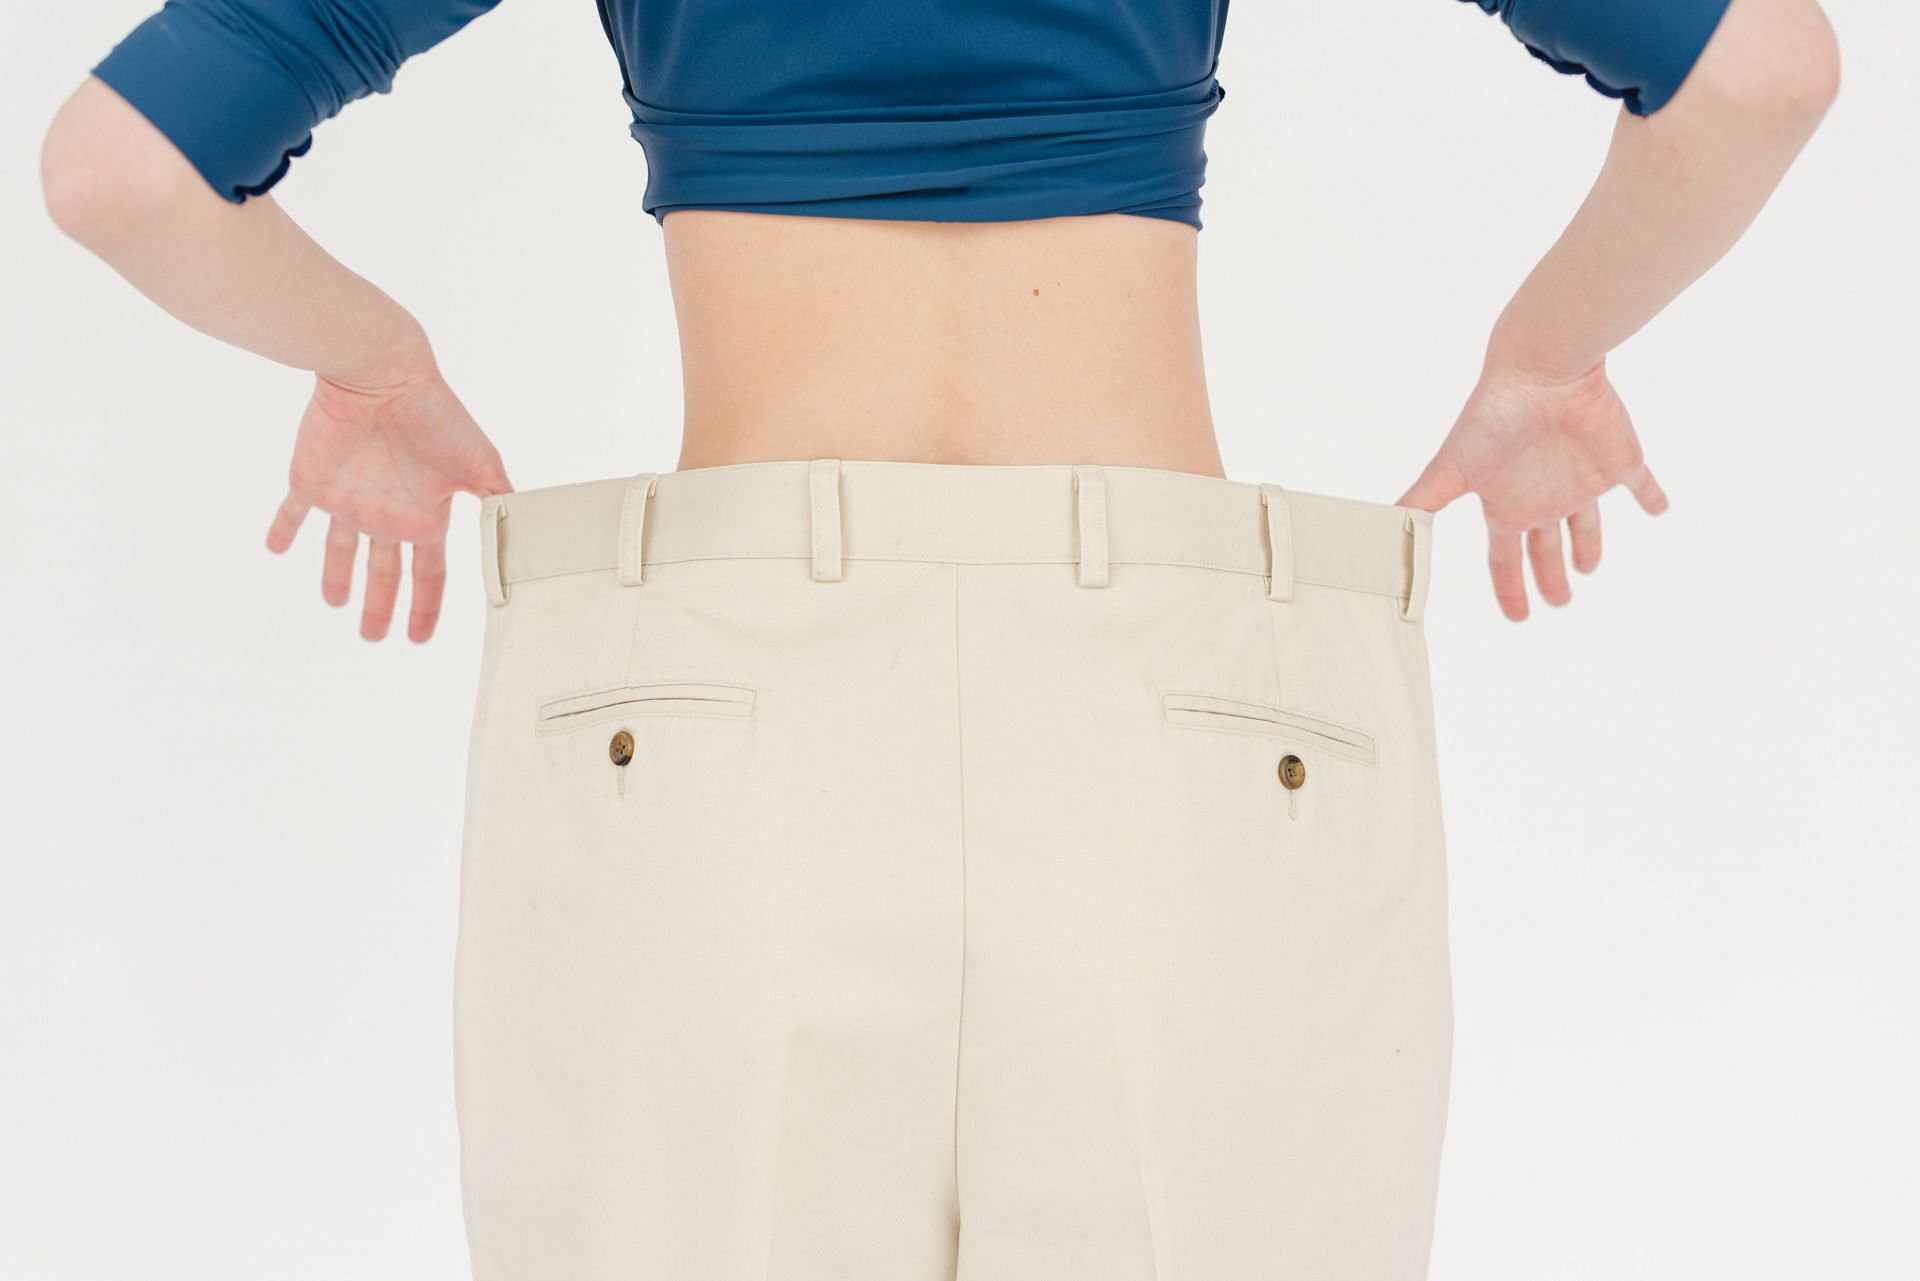 How to get a thinner waist? (Image via Pexels/ Shvets Production)